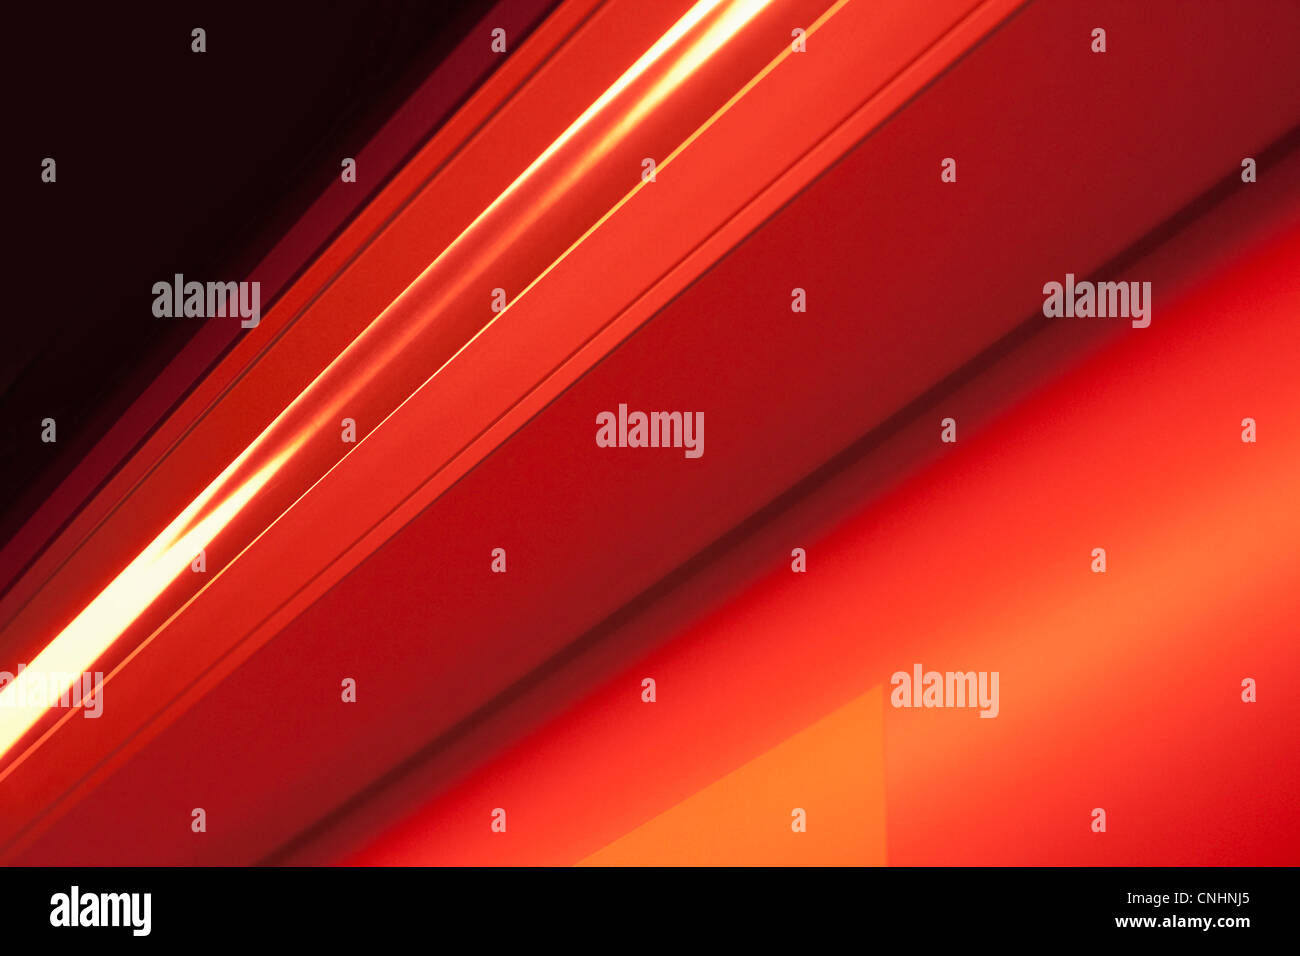 Close-up abstract of slanted red shape Stock Photo